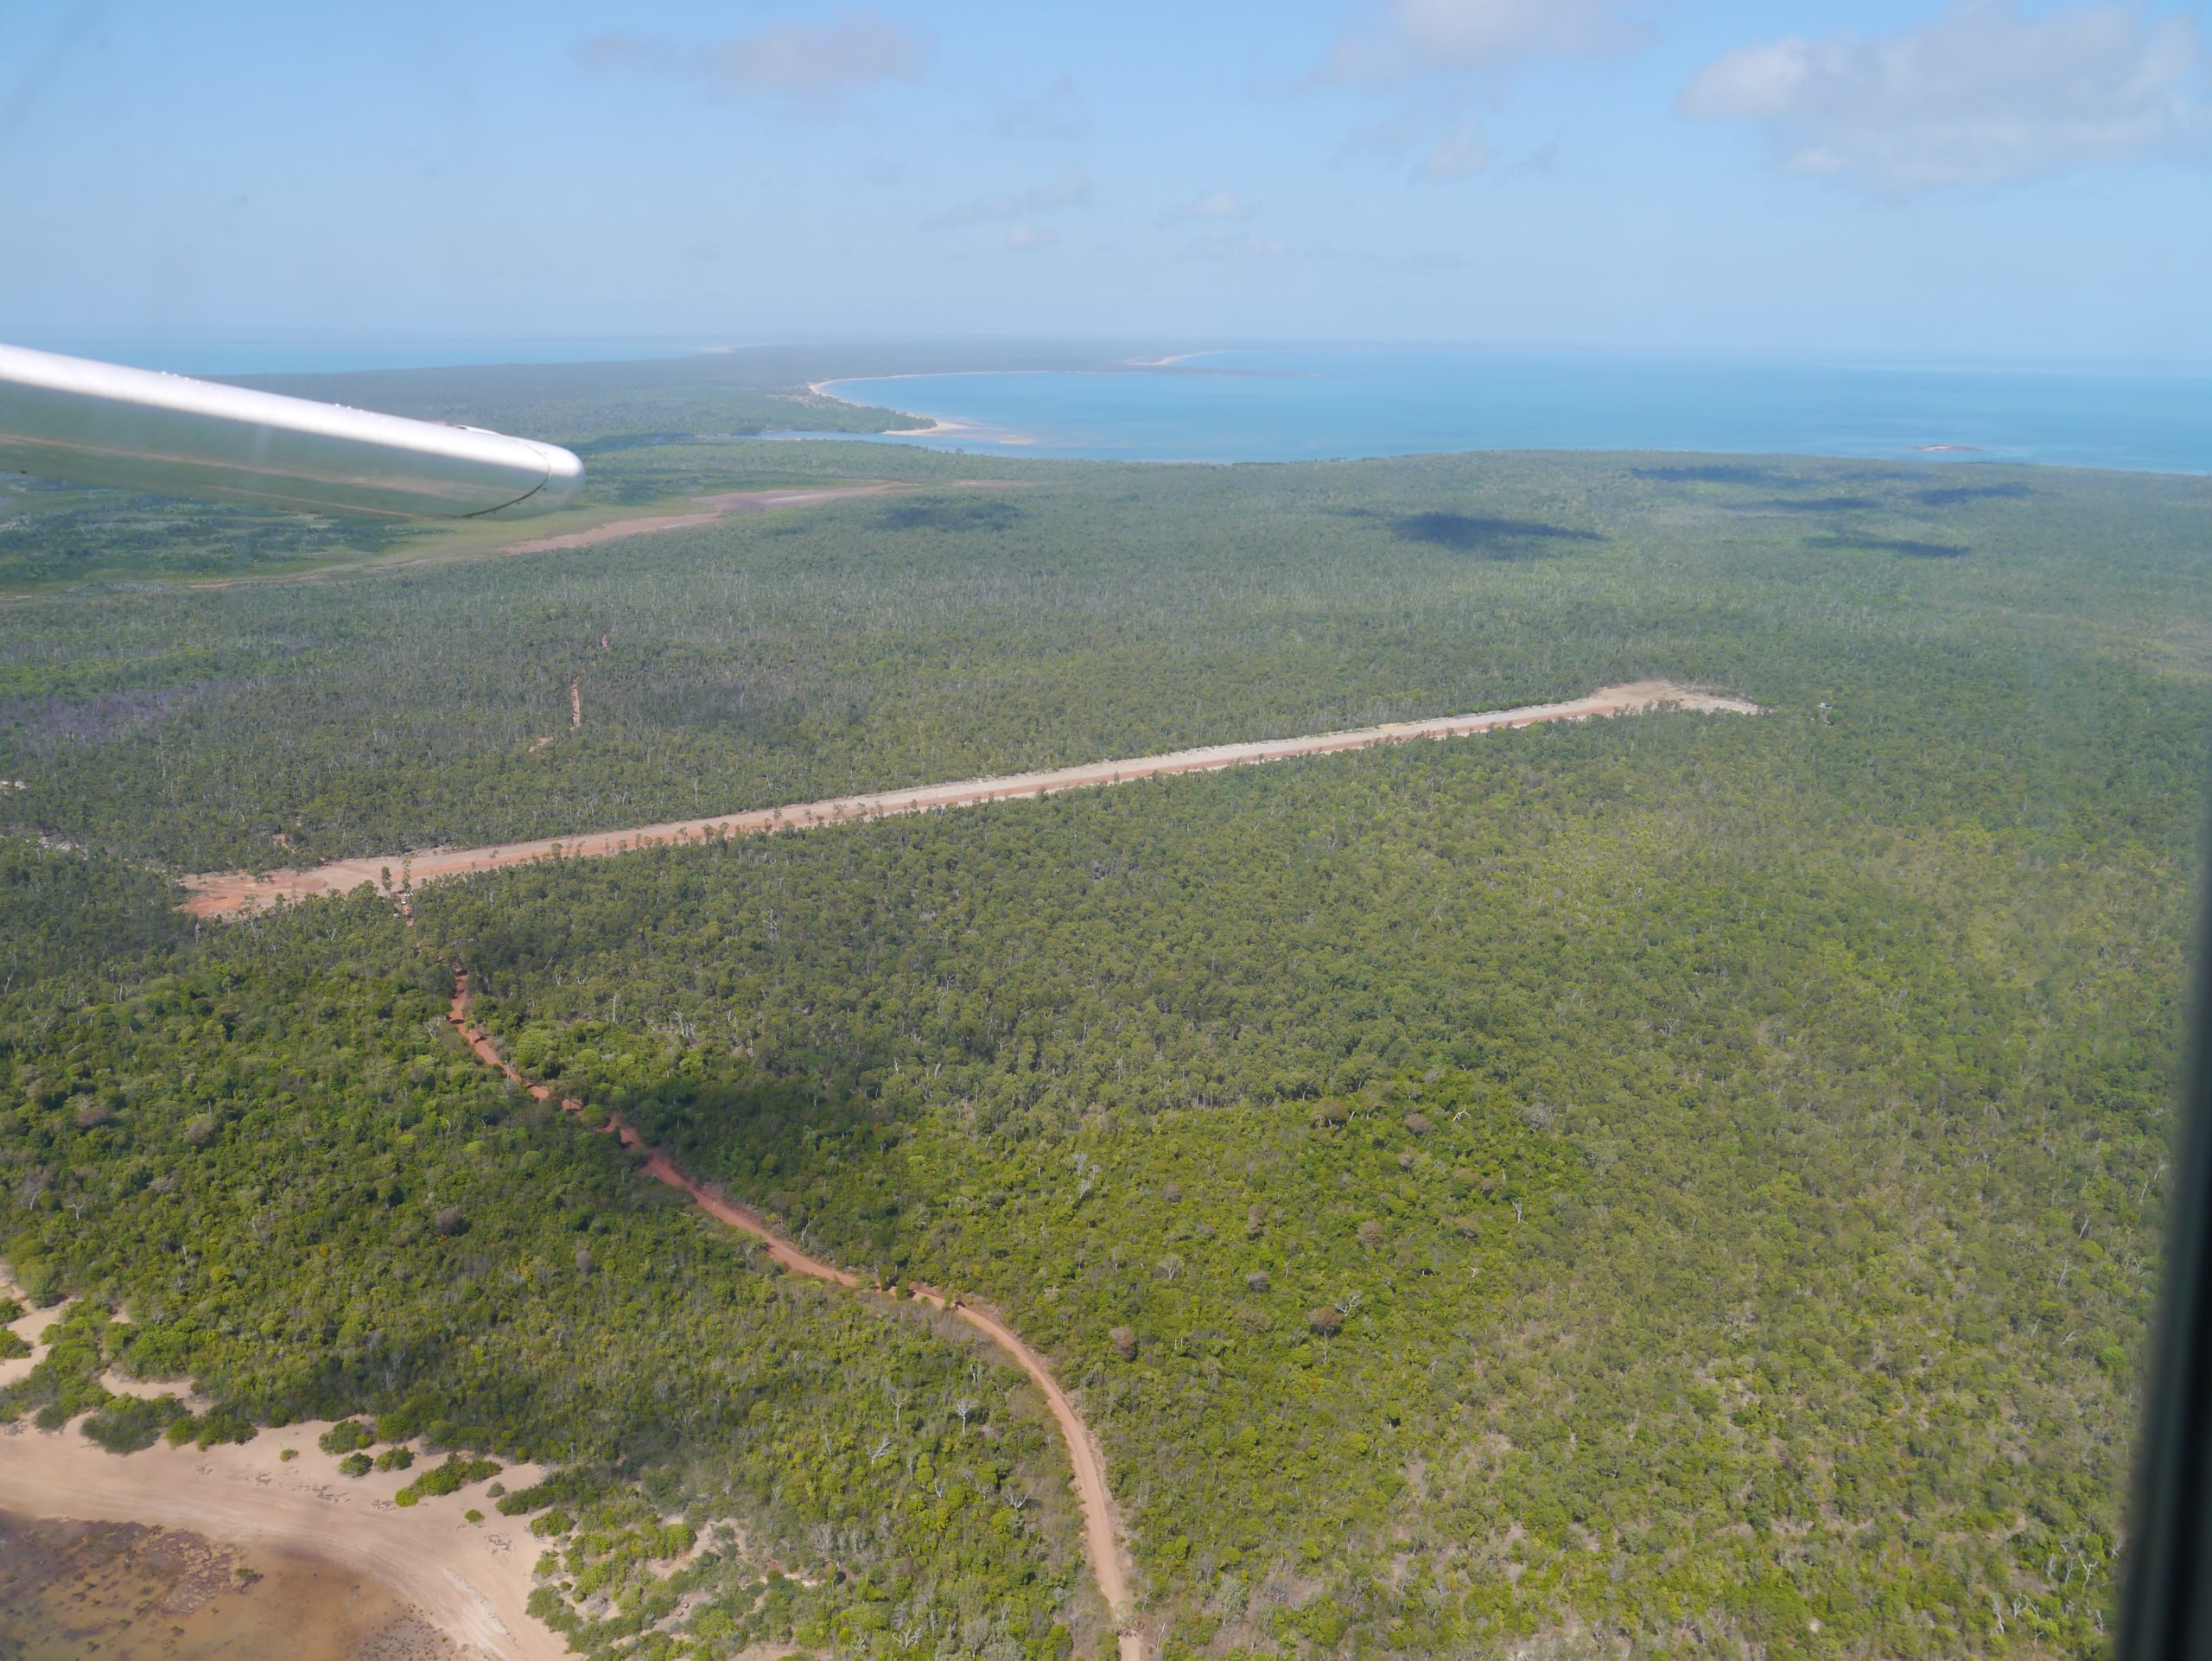 Aerial view of Elcho Island in Australia’s Northern Territory